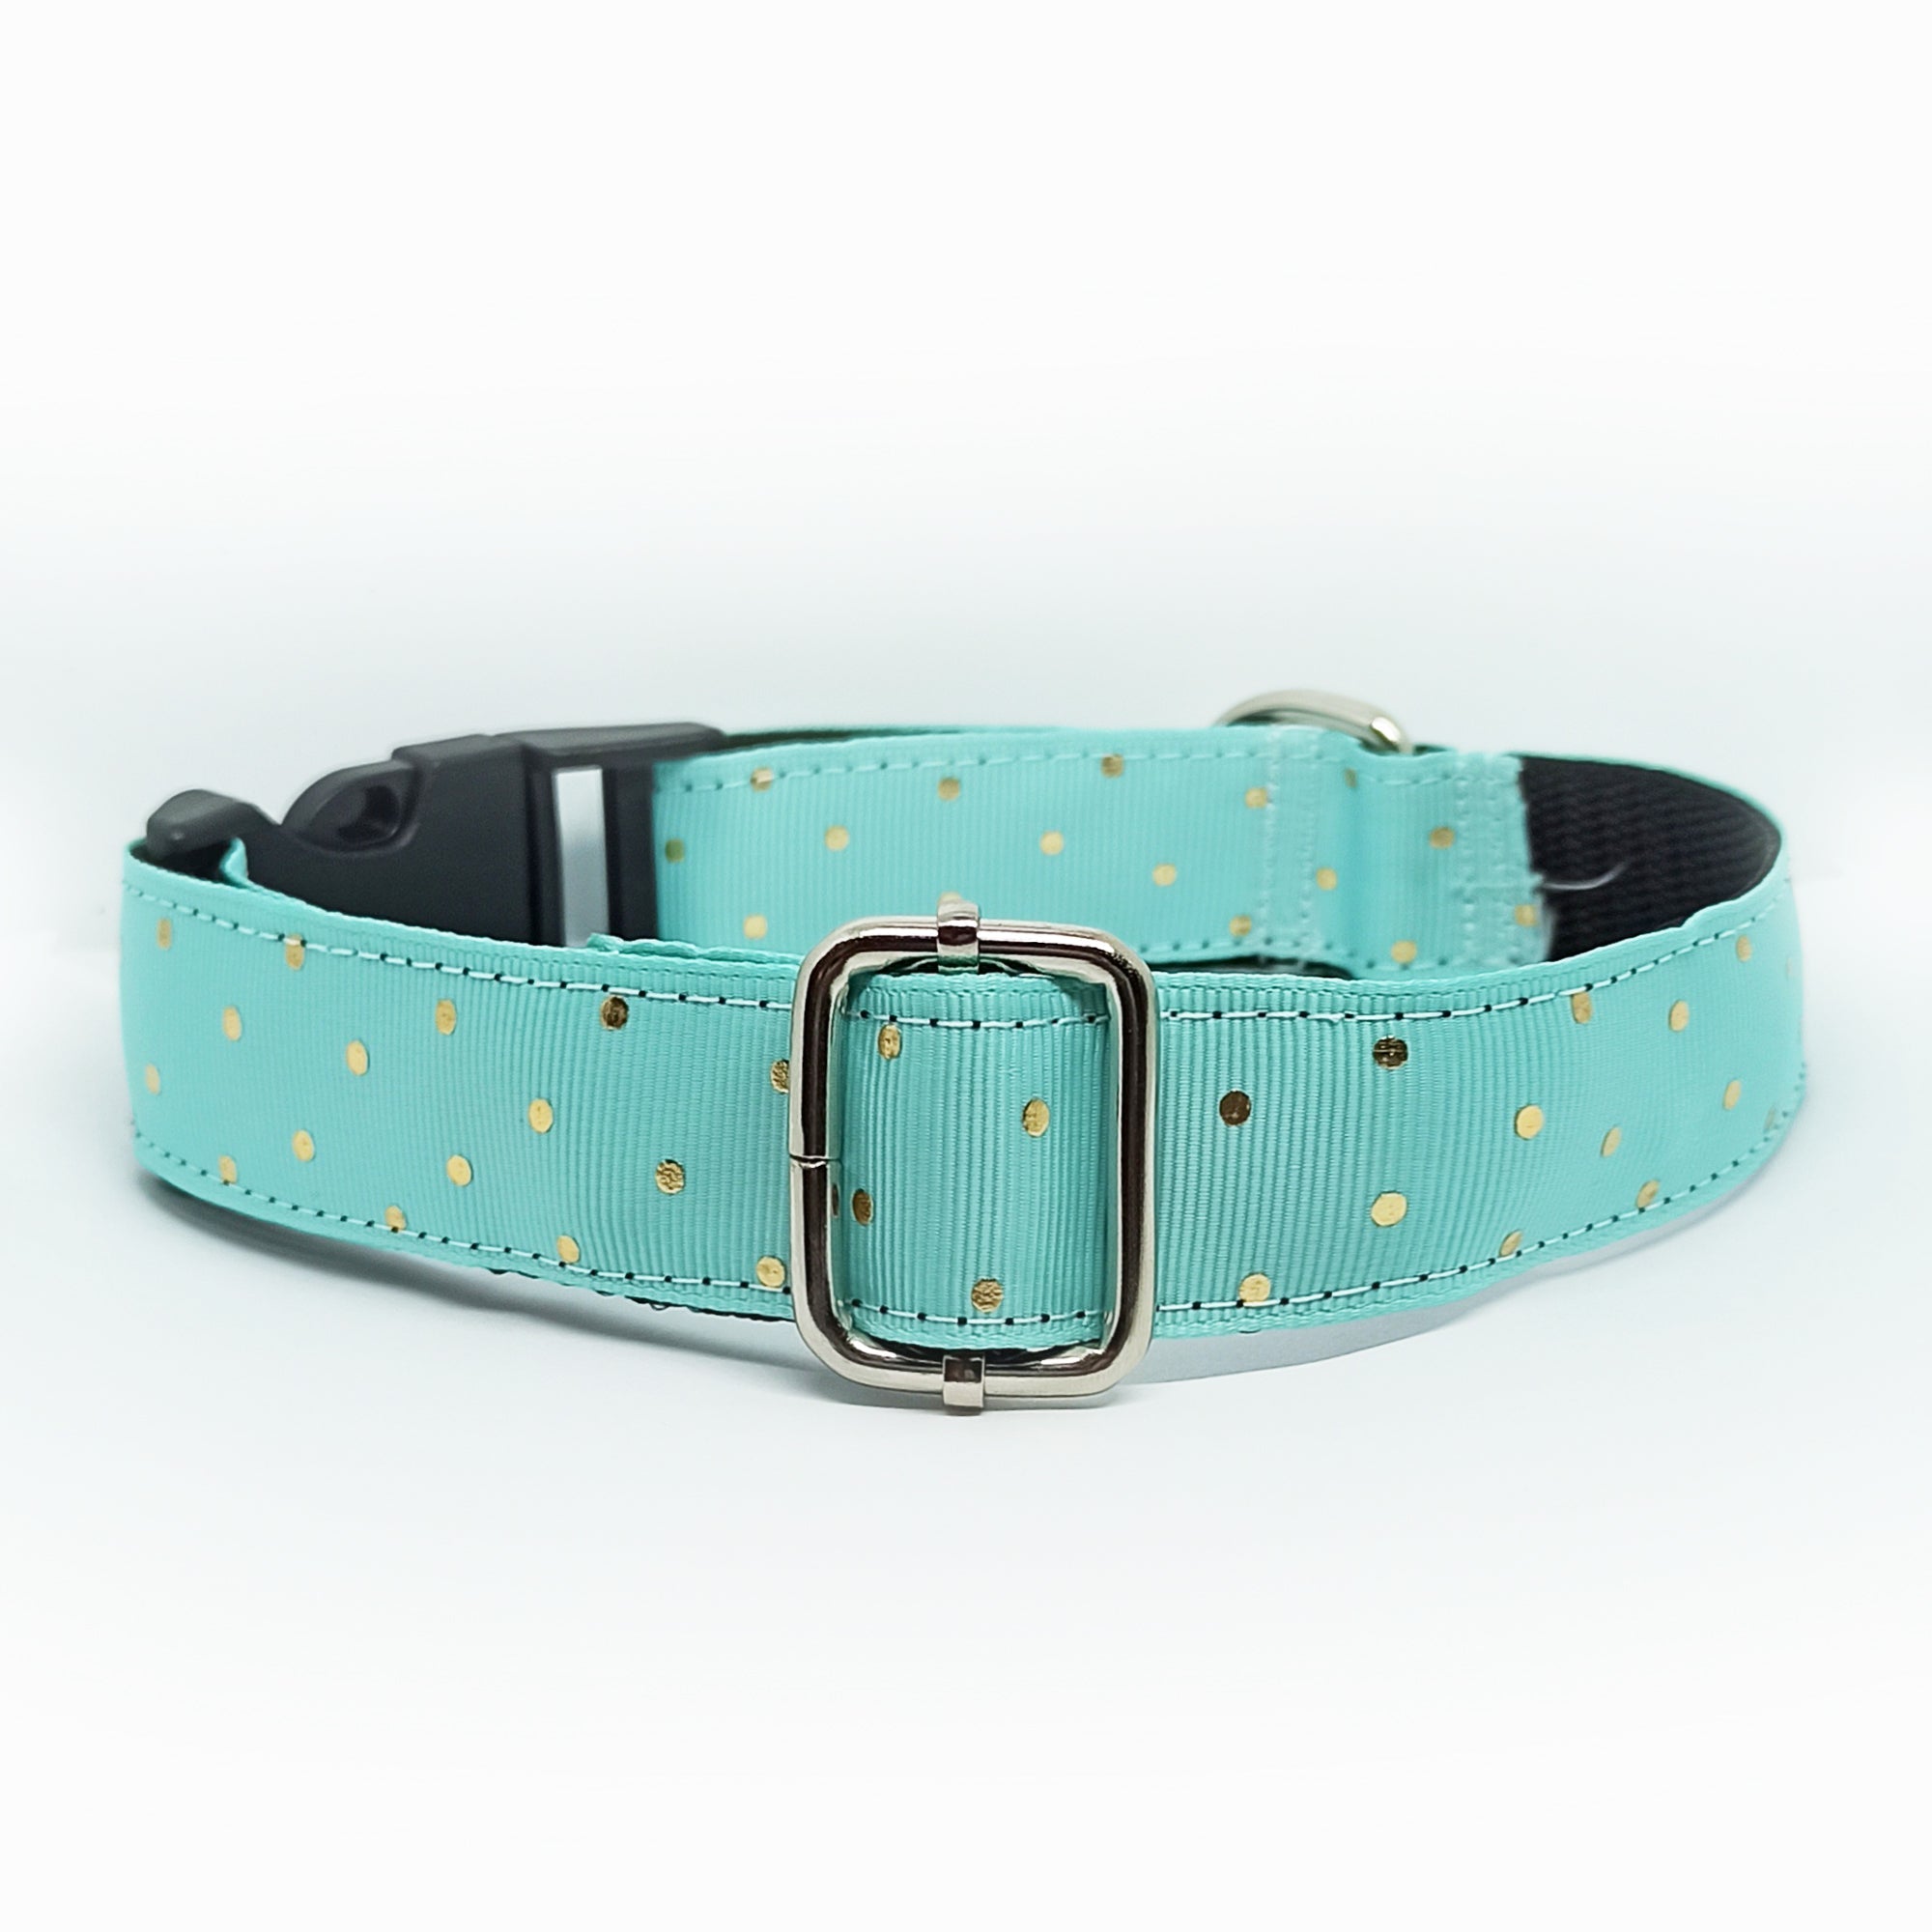 Mintgreen with Golden Polka Dots Dog Collar - S-L sizes with custom matching pet tag - Adventures of Rubi